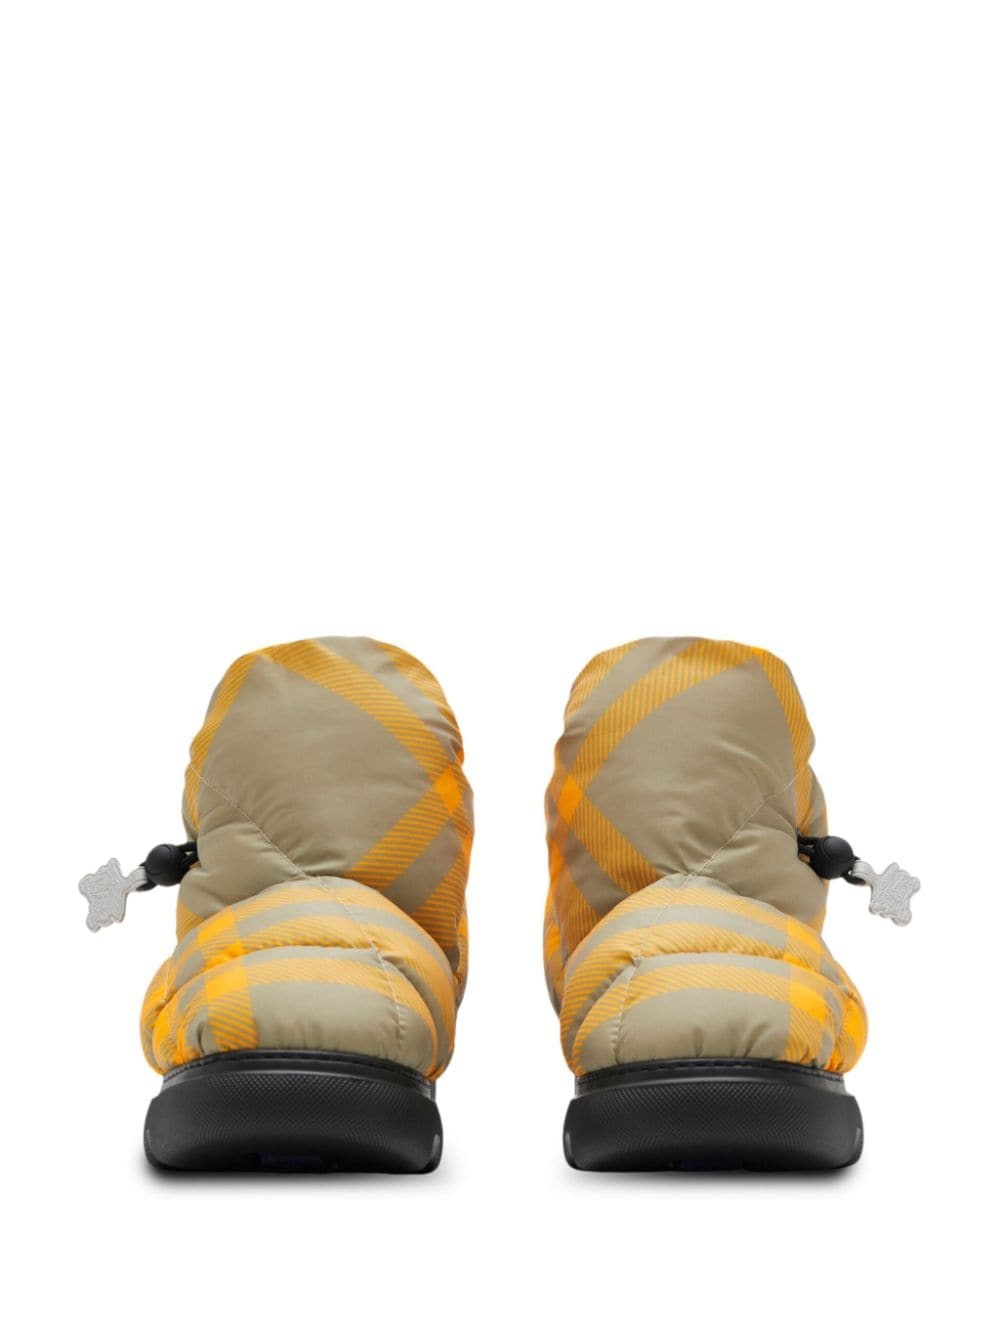 Check Pillow padded snow boots - 2